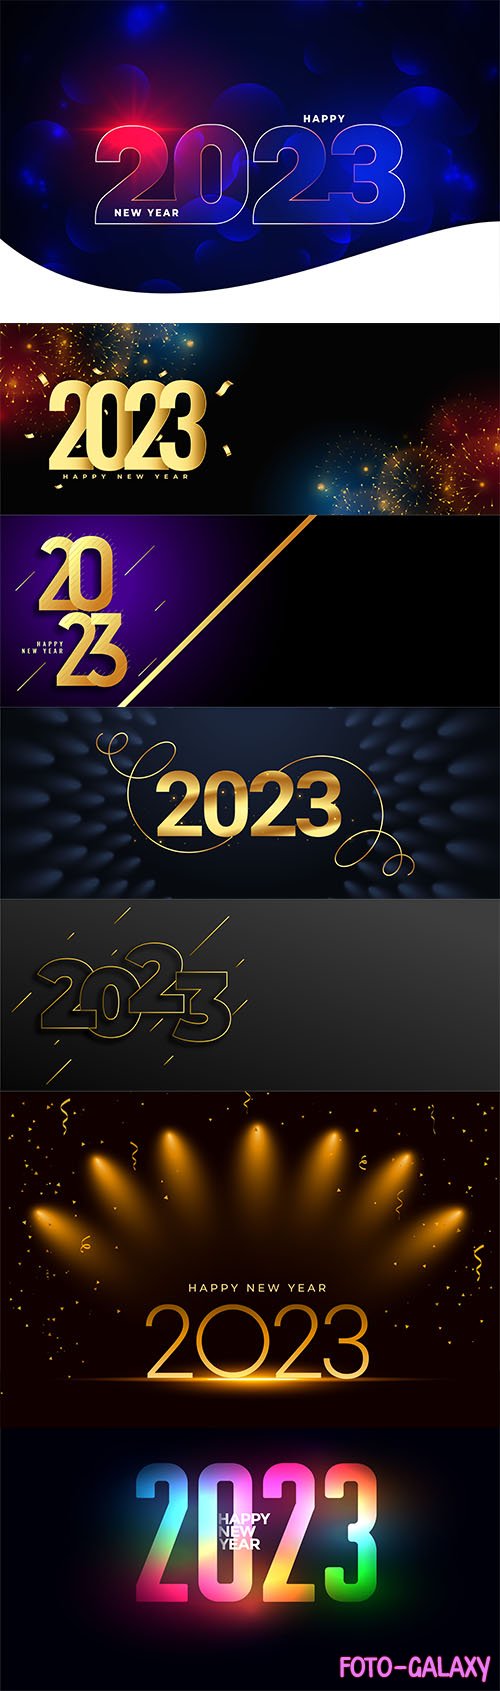 Golden 2023 text with spot light effect for new year banner